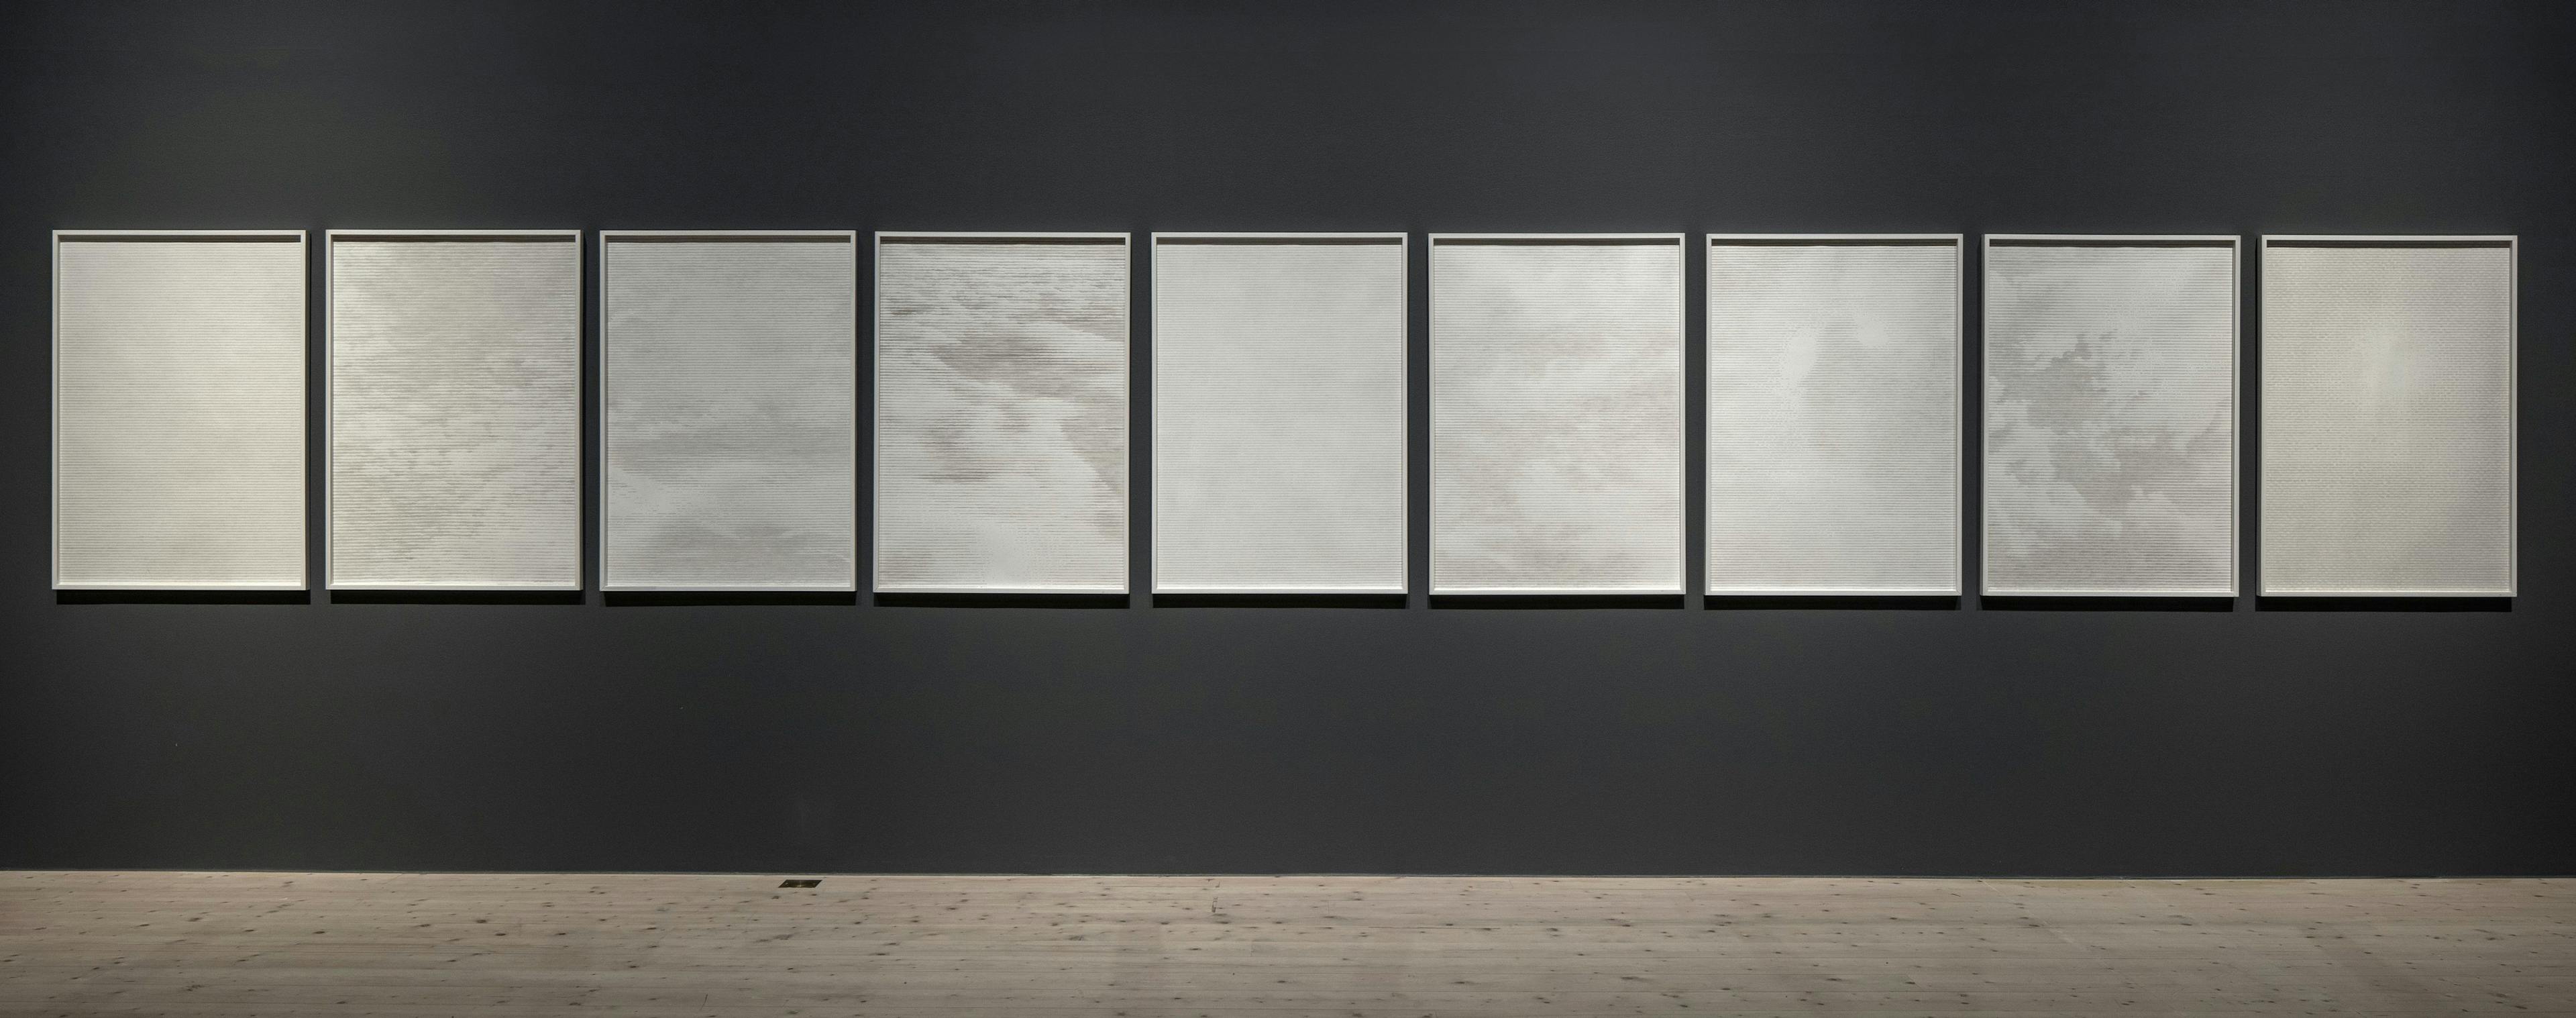 Eight works from the series Oceans of Air (by Anna Ling 2010), hung on a dark gray wall